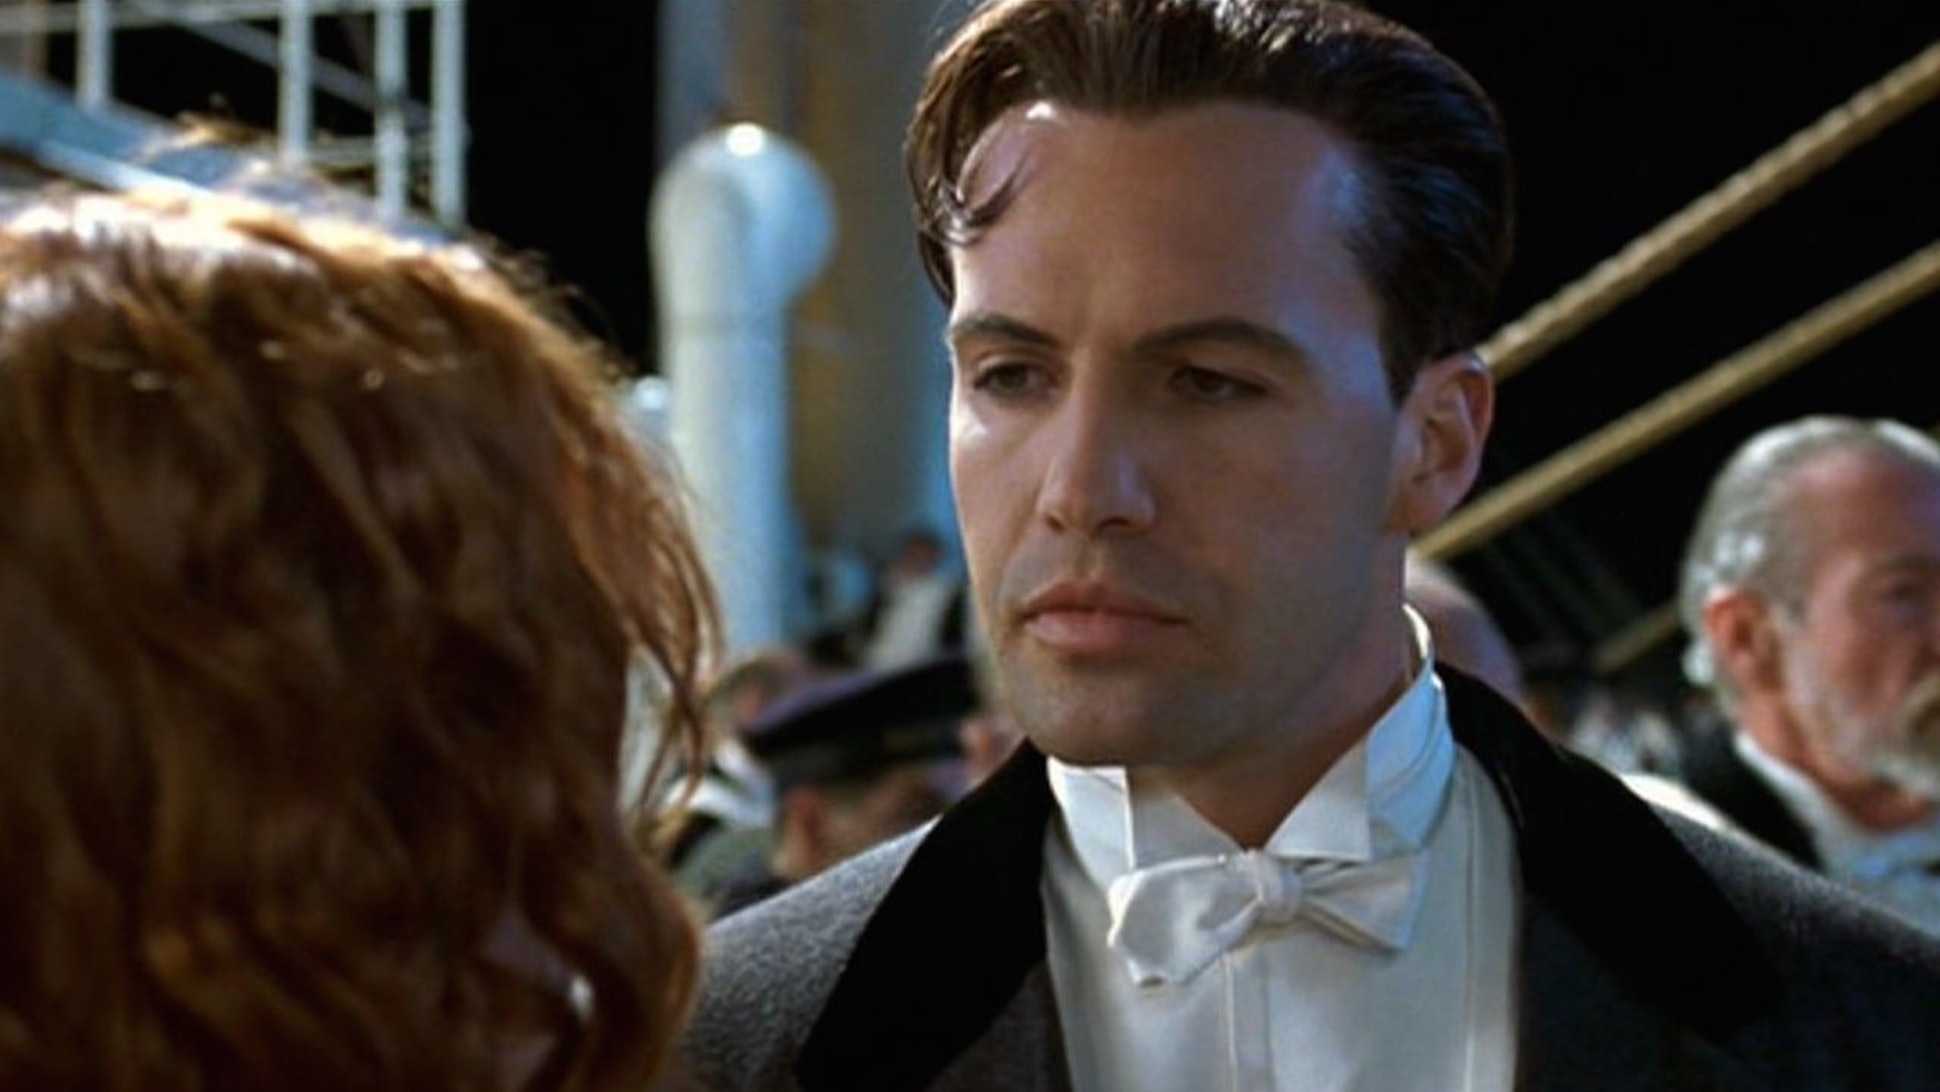 Billy Zane as Cal Hocksley looking at Rose on the Titanic.